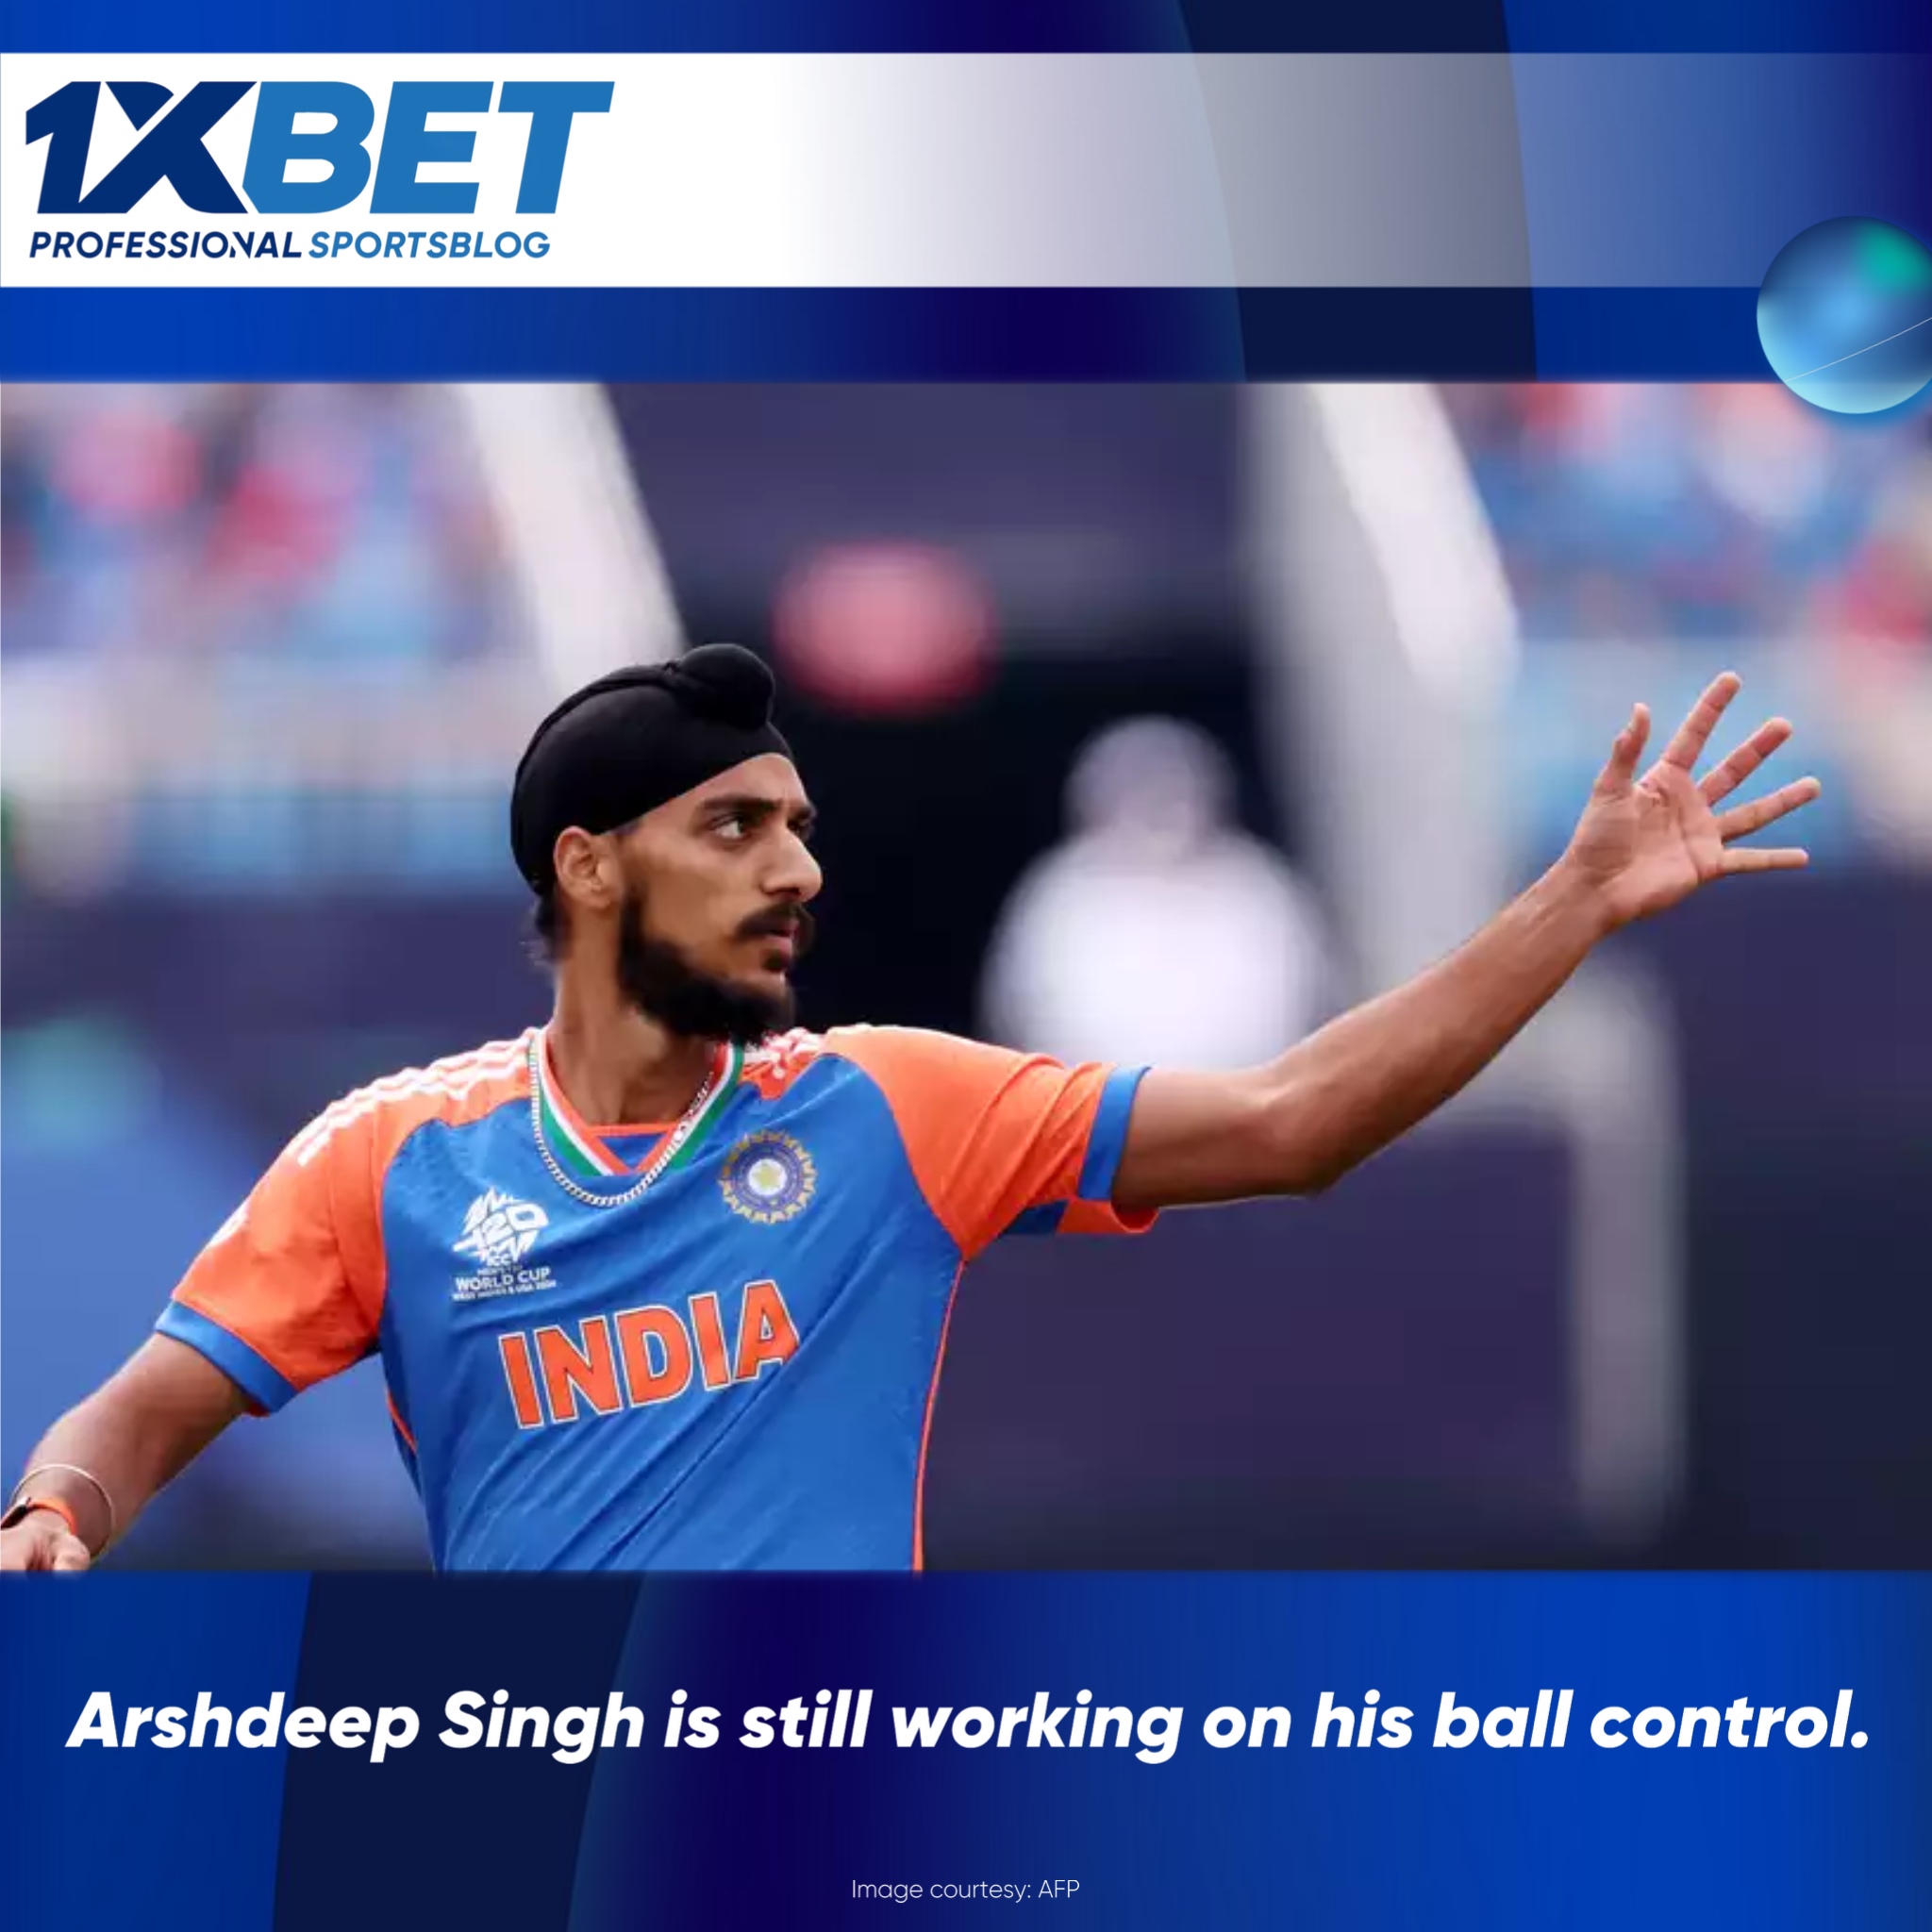 Arshdeep Singh's Bowling Dilemma: Control and Impact on Innings